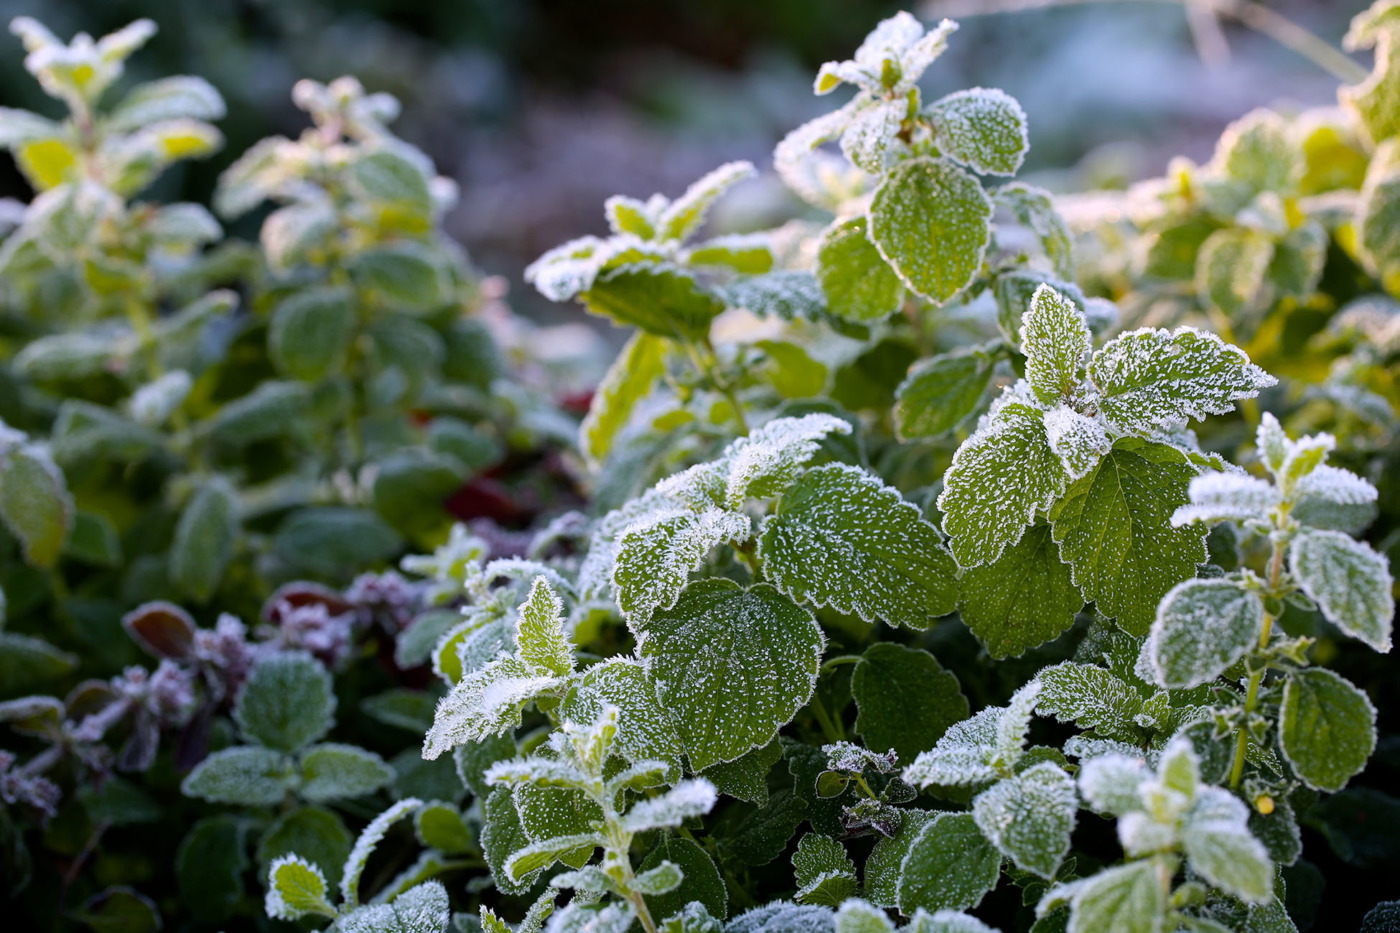 Lemon balm, all dressed up in frost.